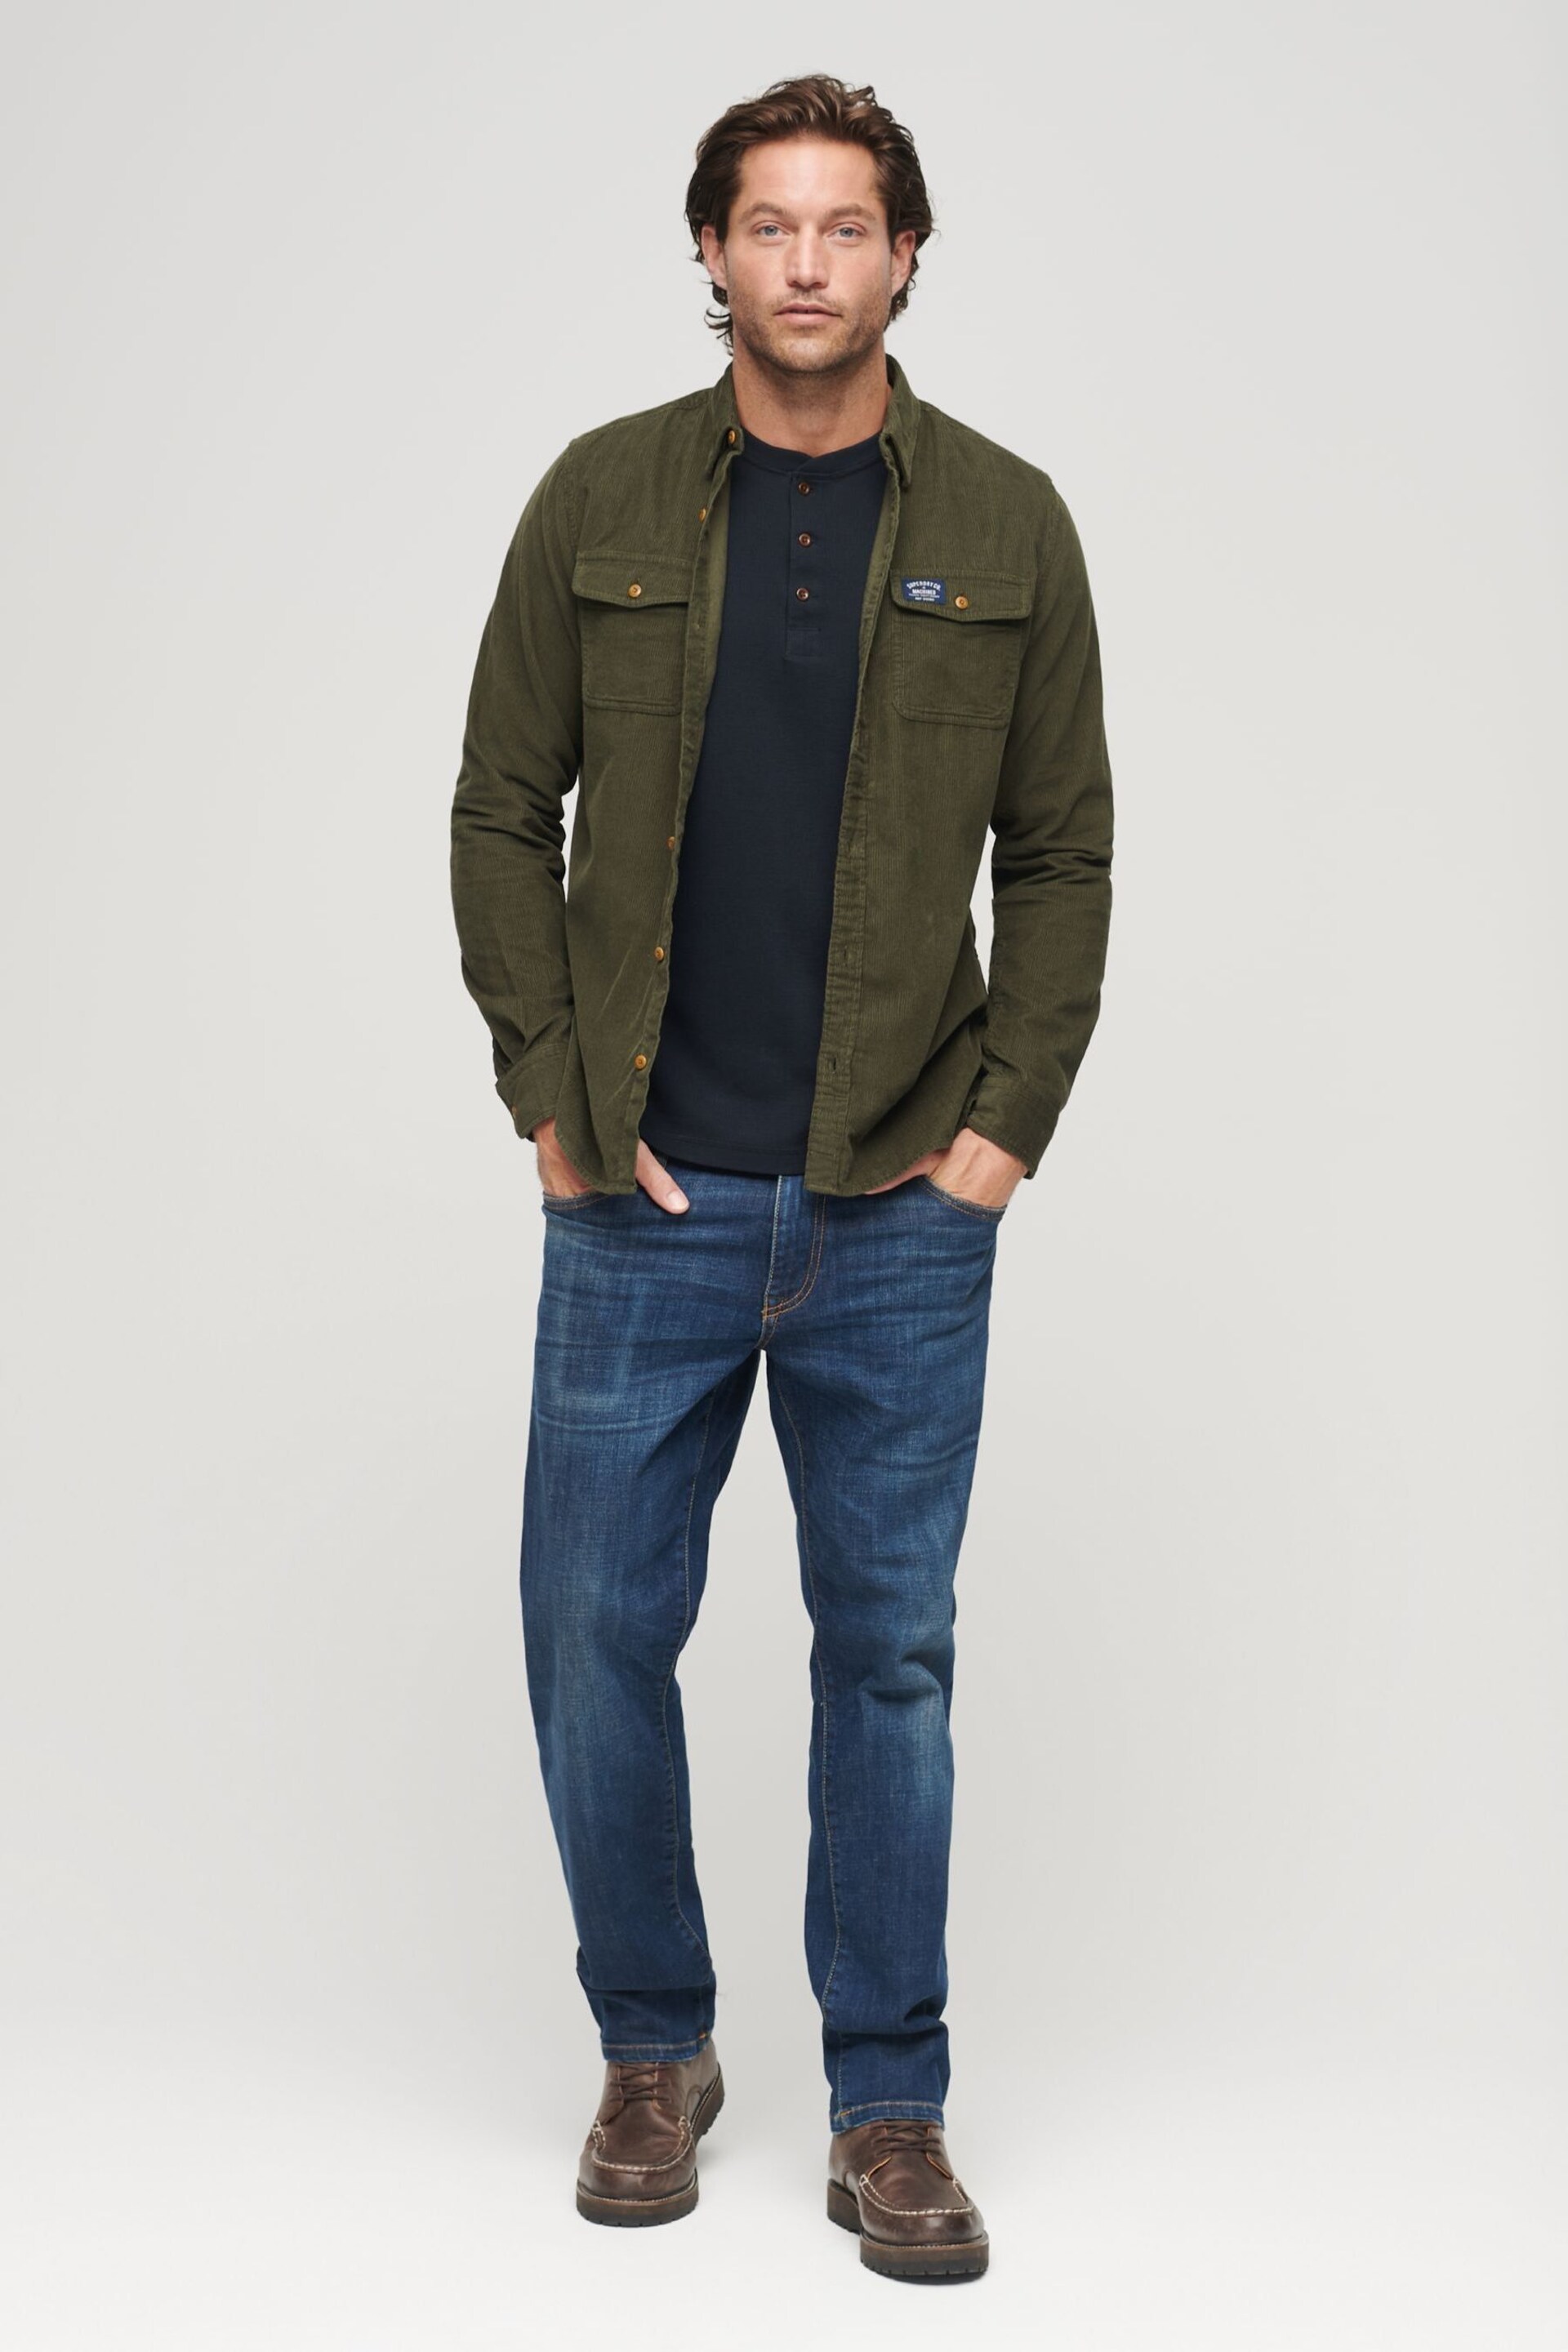 Superdry Green Trailsman Cord Shirt - Image 3 of 6